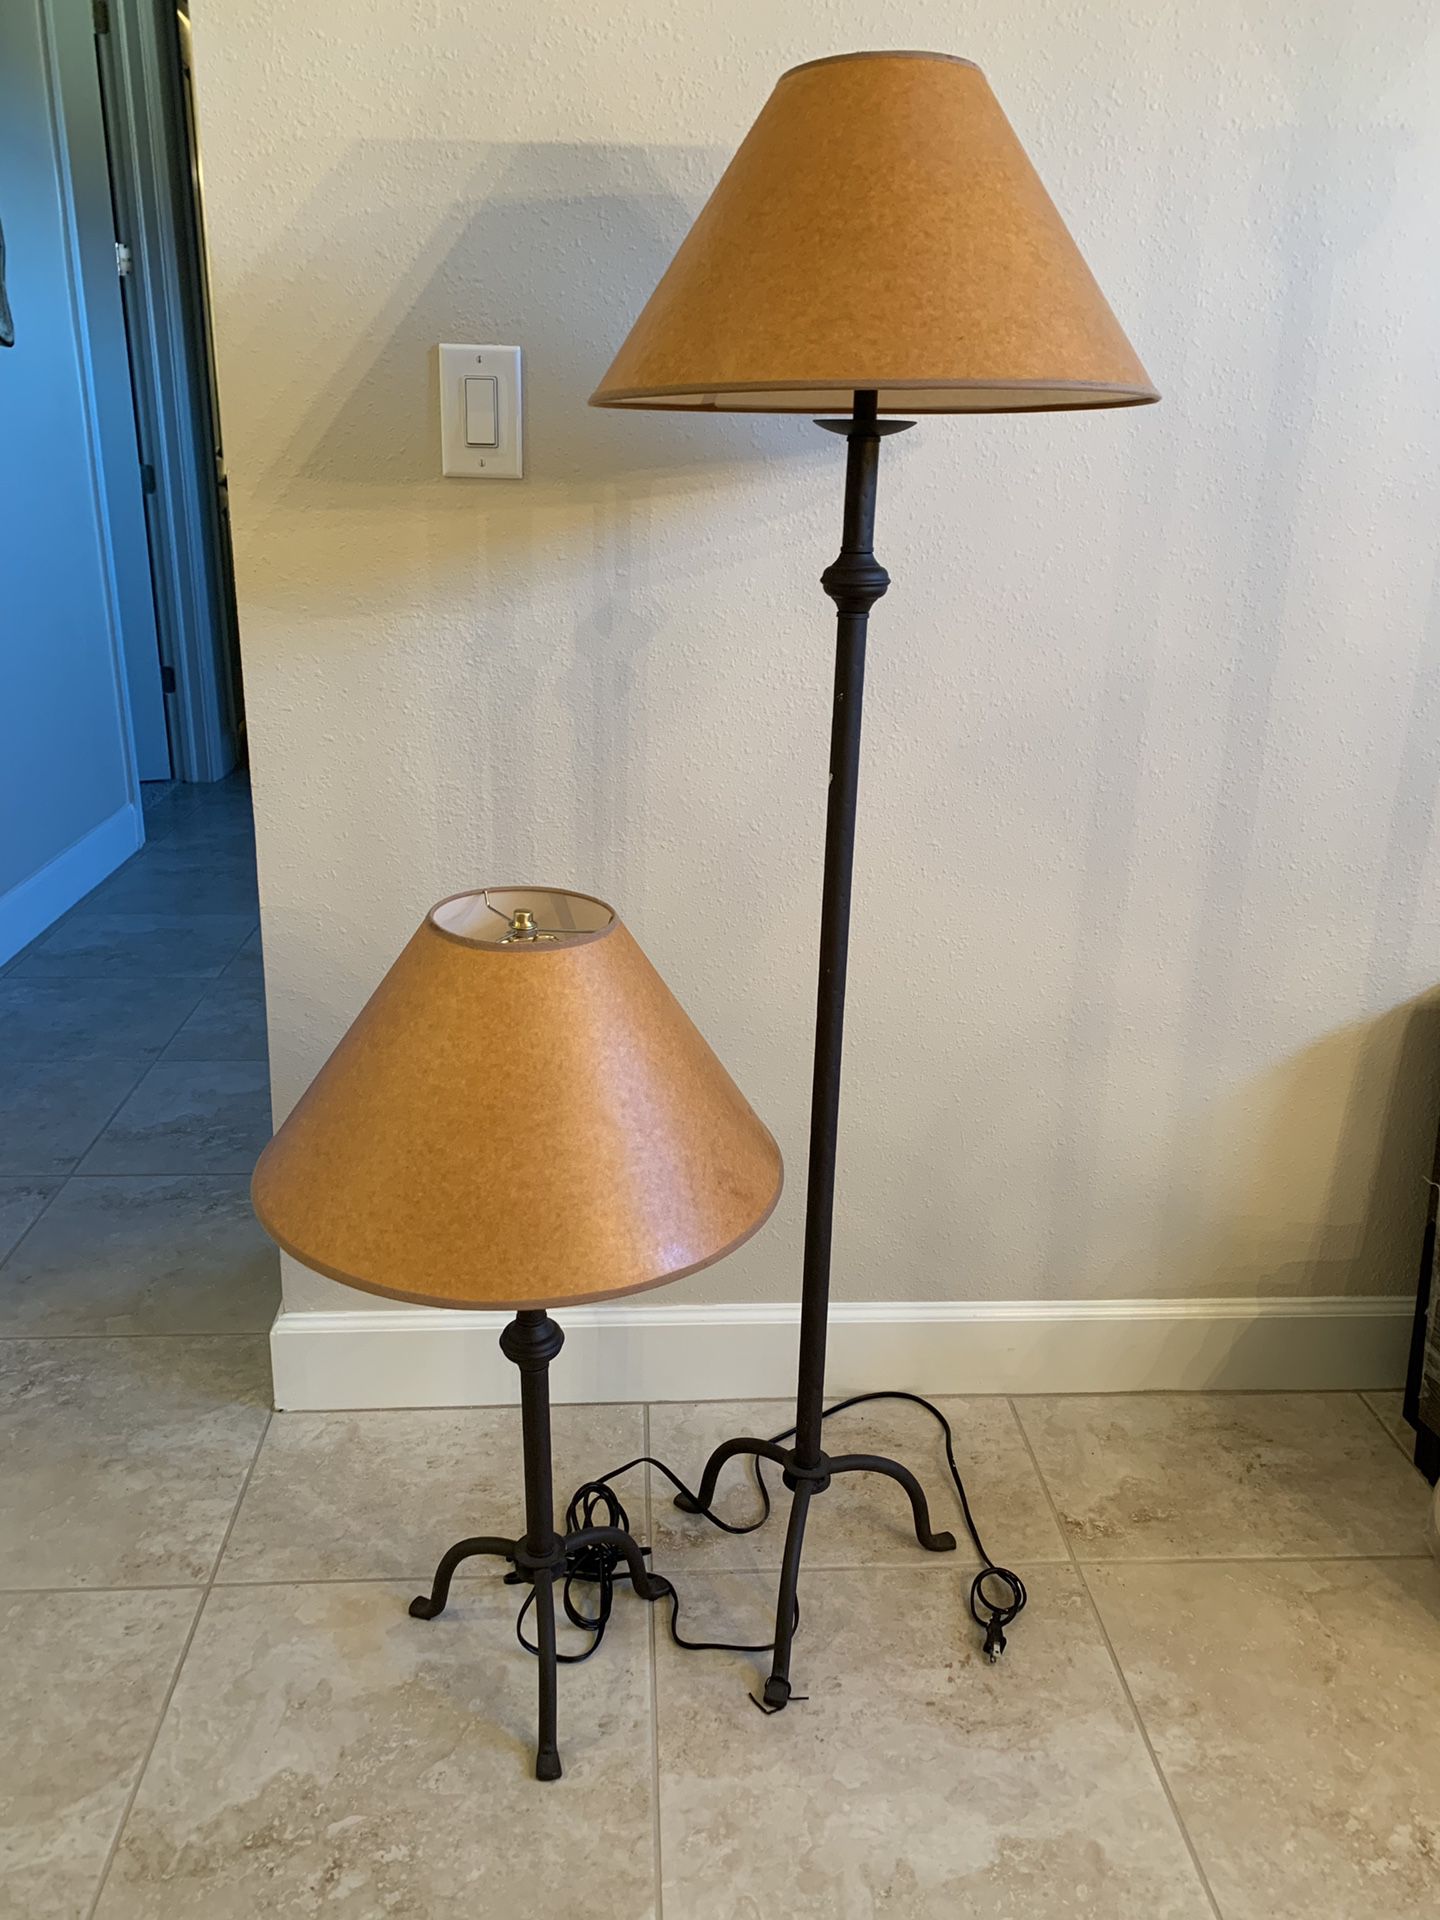 Pottery Barn Floor lamp and matching table lamp